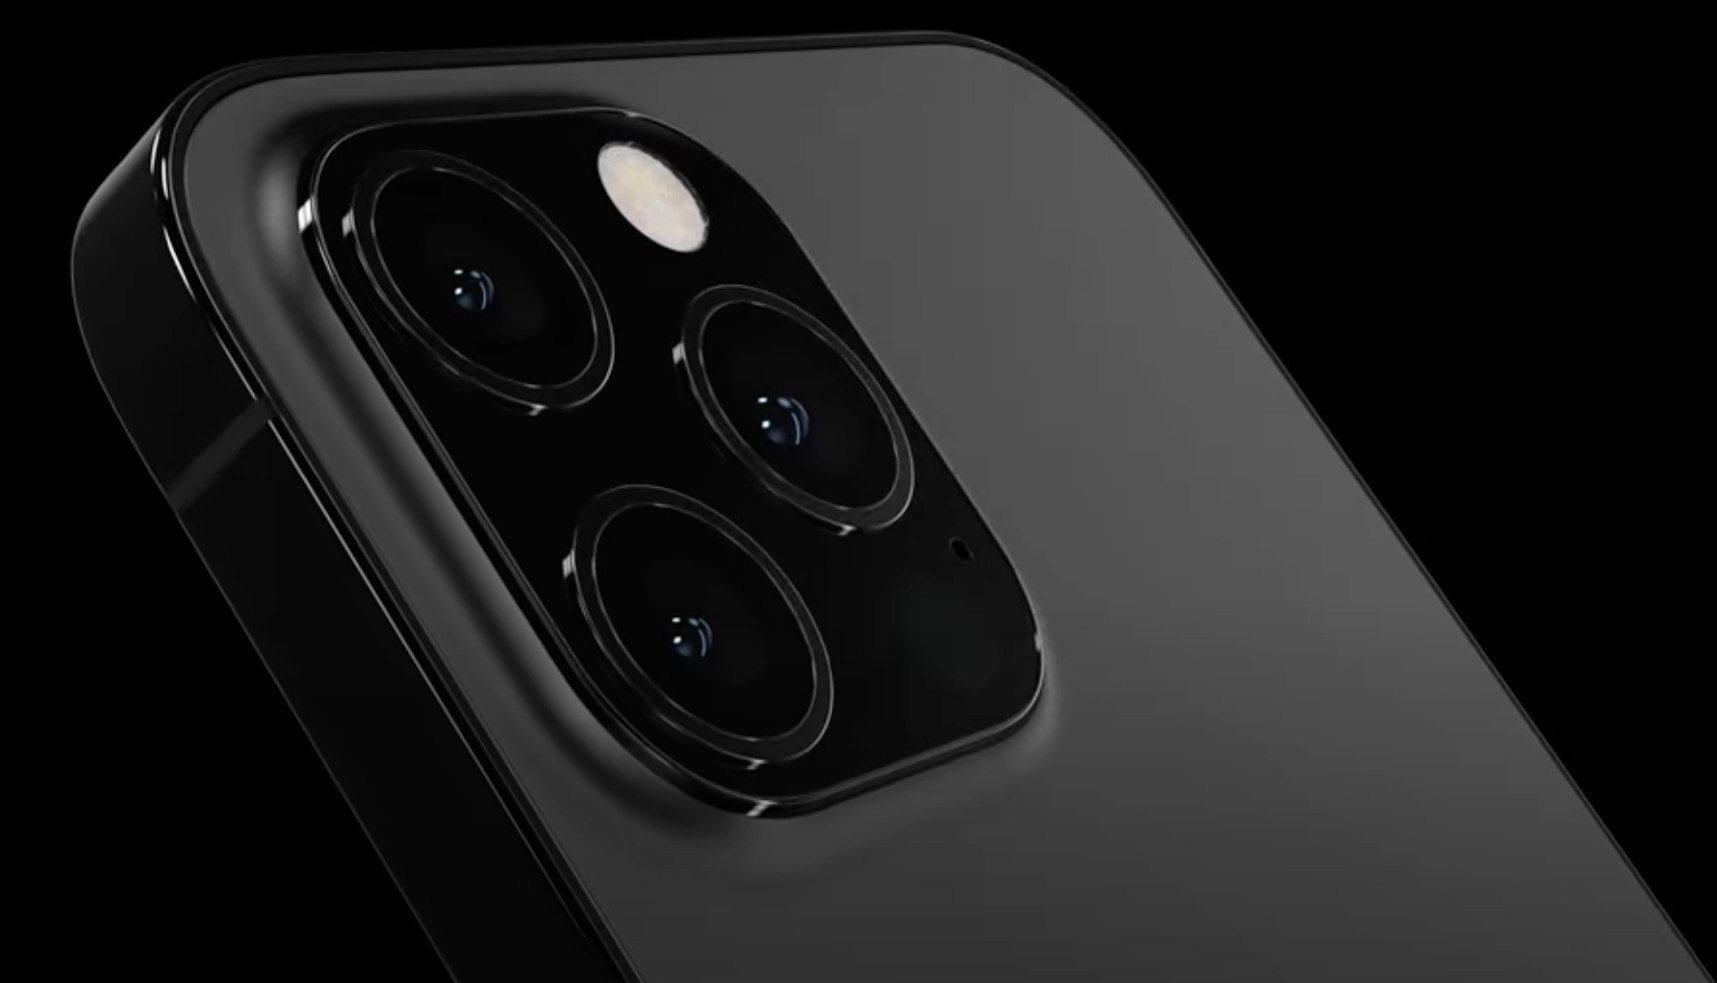 iPhone 13 may boast a stunning matte black color option | Cult of Mac